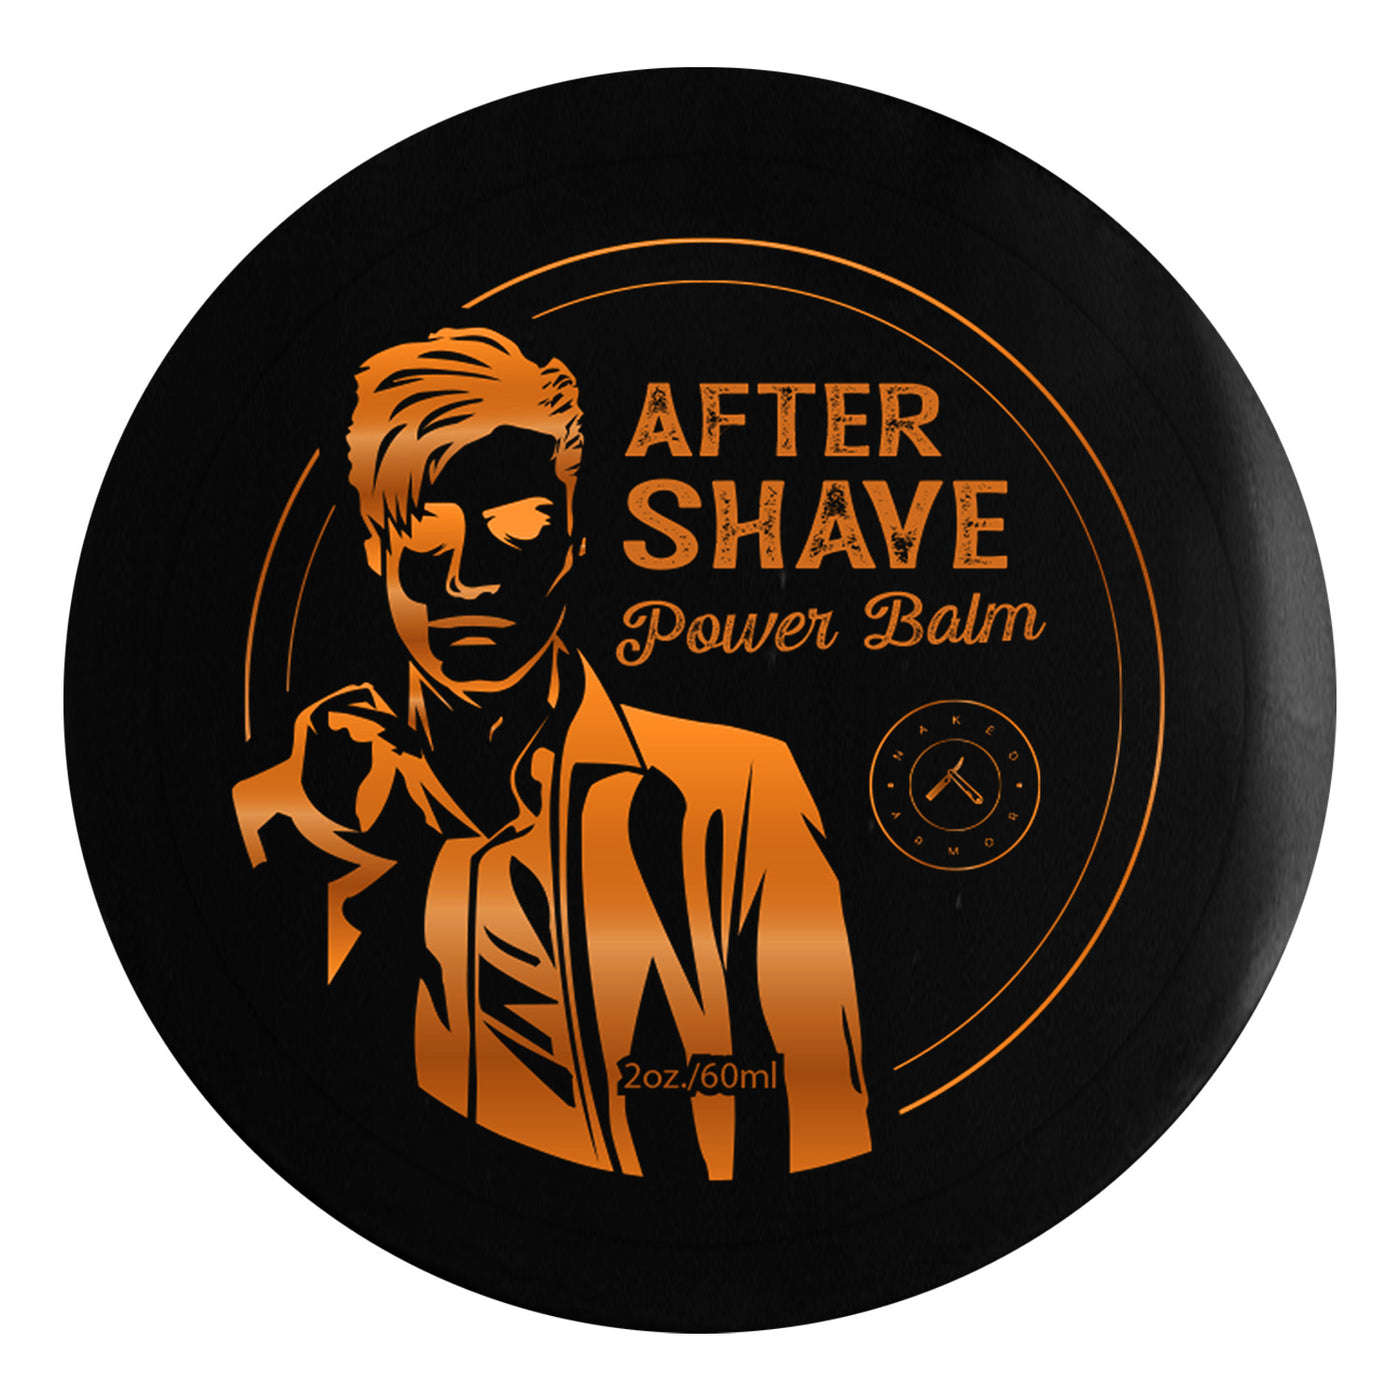  Solomon Aftershave Power Balm by Naked Armor sold by Naked Armor Razors